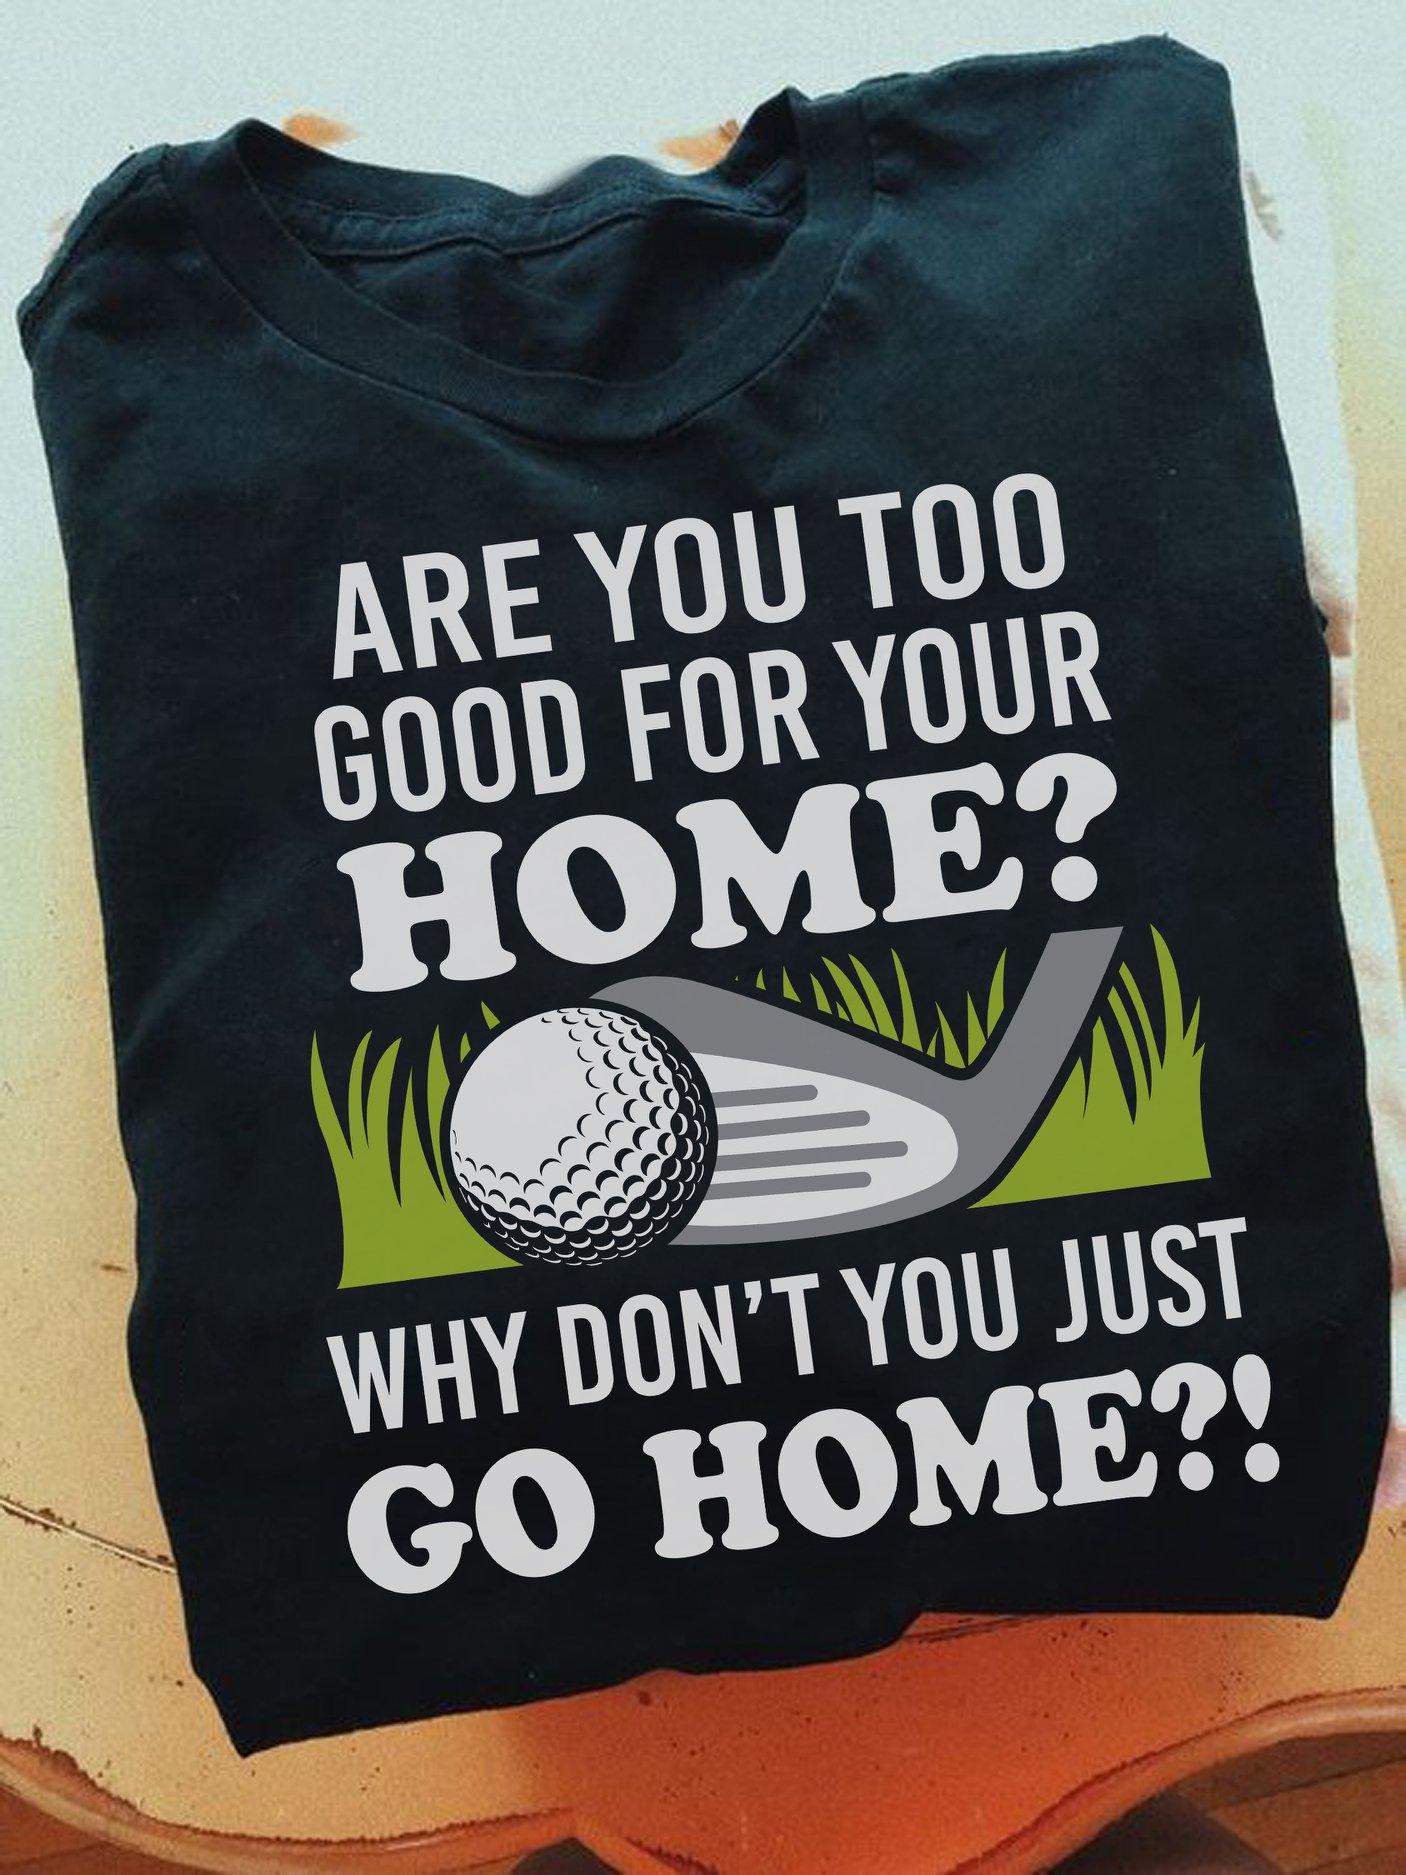 Are you too good for your home why don't you just go home - Gift for golfers, love playing golf